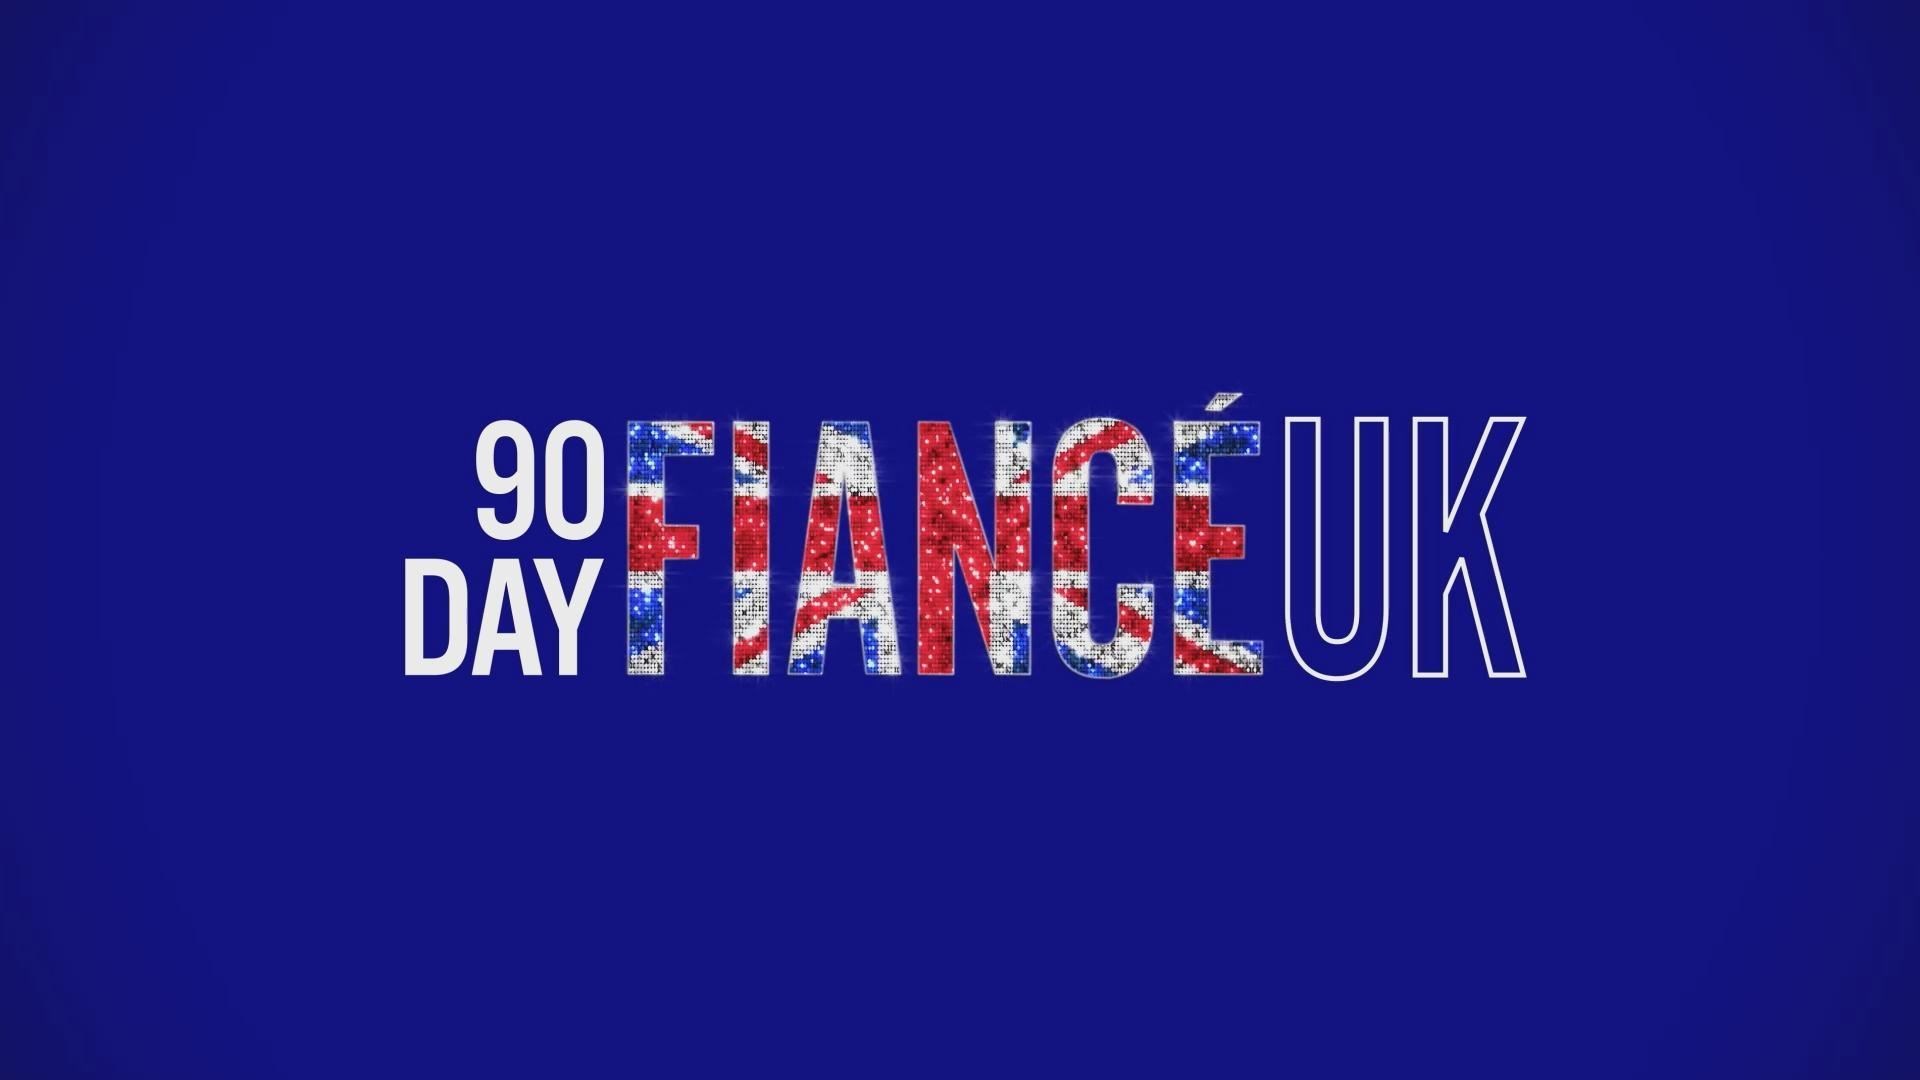 90 Day Fiance UK is looking for long-distance couples to features in its second series.